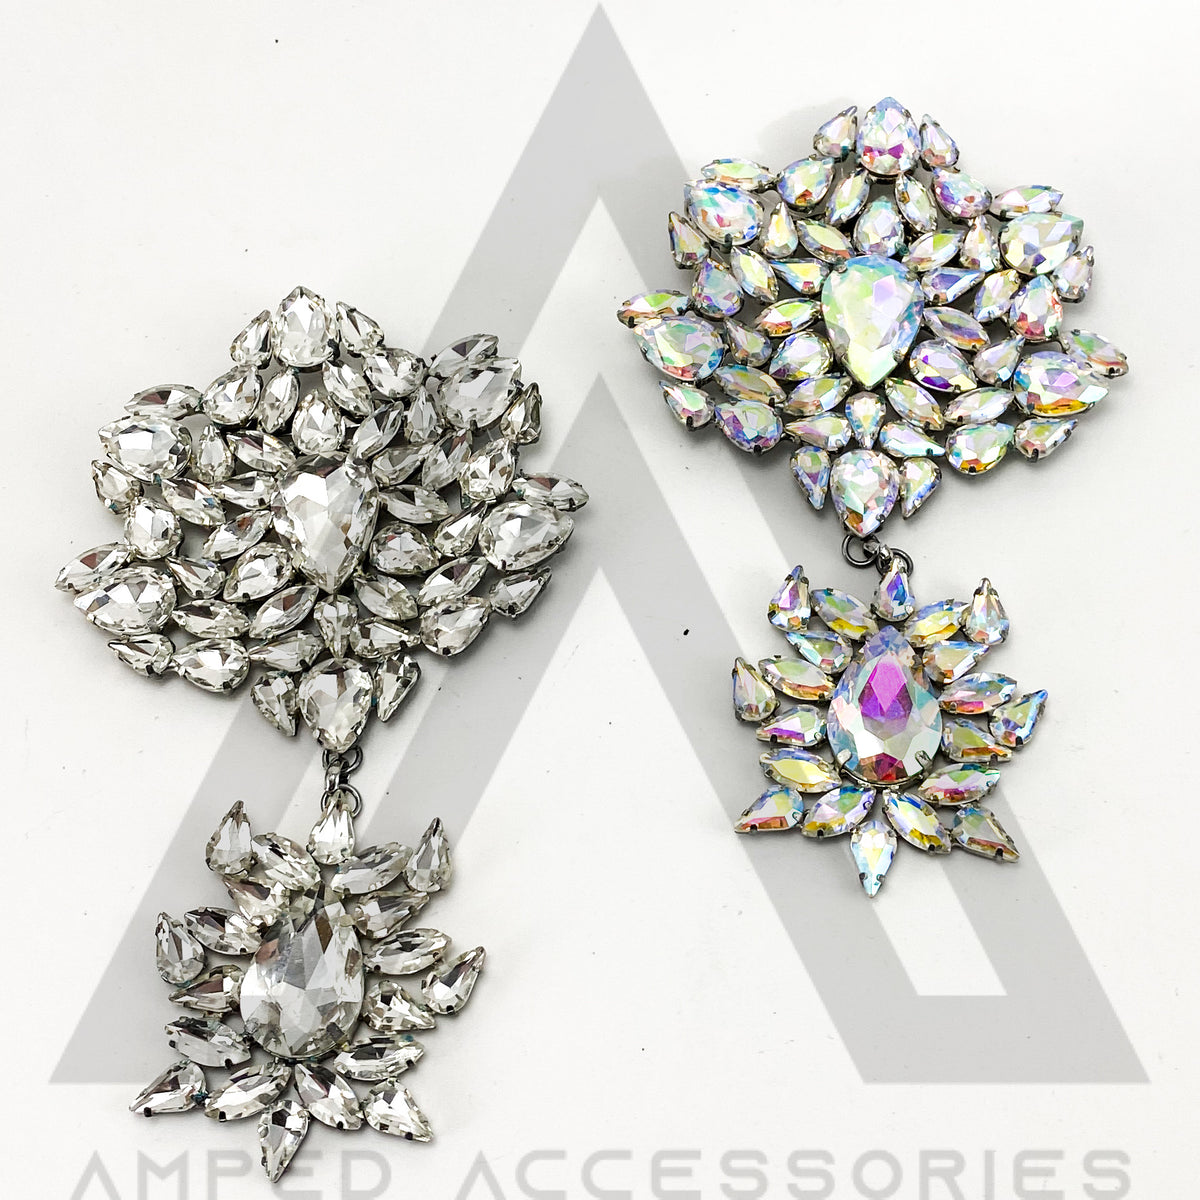 2 Pc Broaches – Amped Accessories